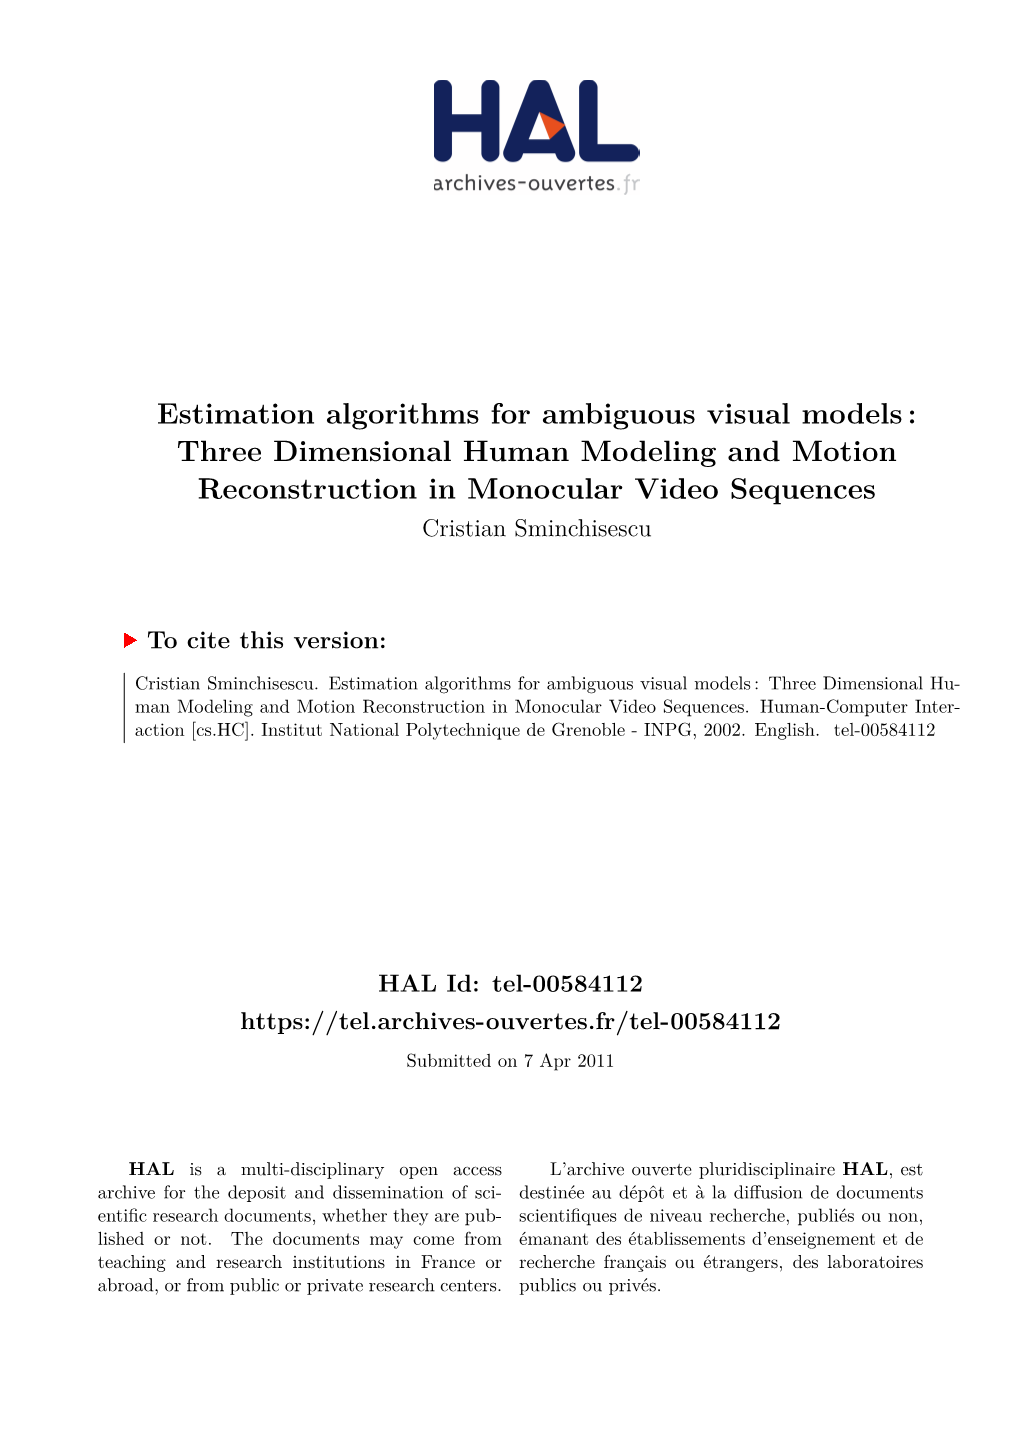 Estimation Algorithms for Ambiguous Visual Models: Three Dimensional Human Modeling and Motion Reconstruction in Monocular Video